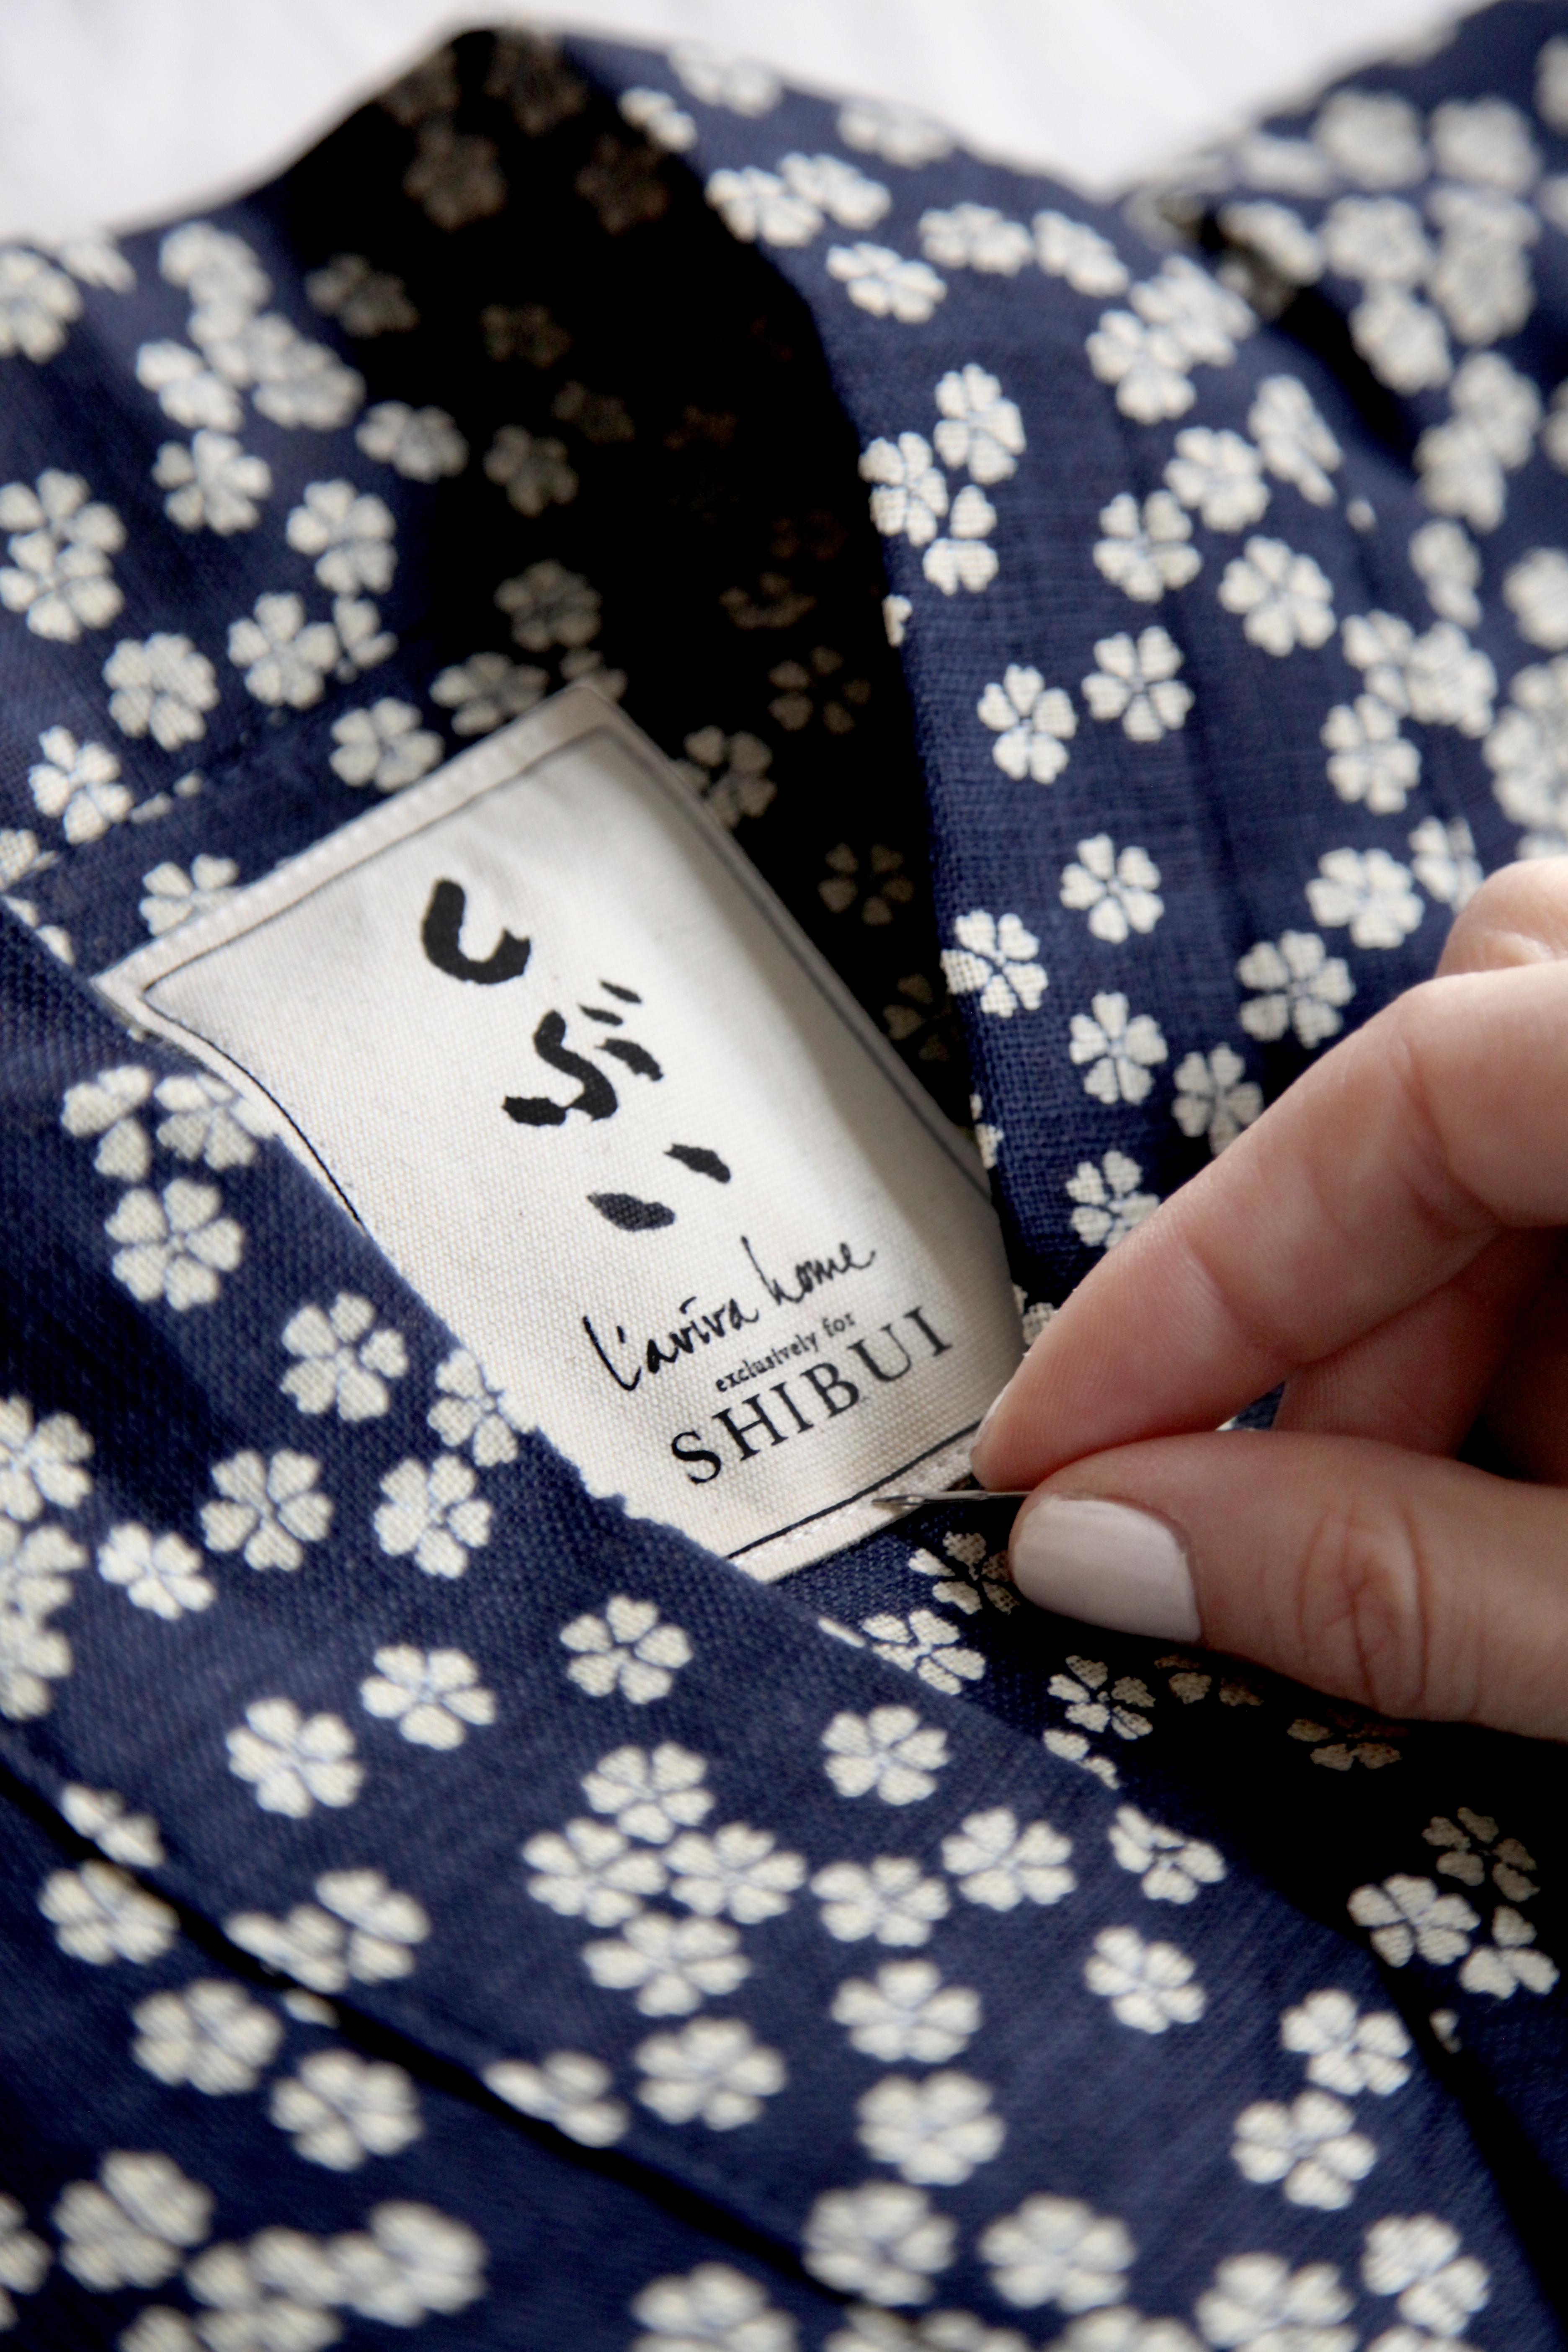 a special project that we collaborated on for the Greenwich Hotel's Shibui Spa. Creating custom Japanese yukata for a luxurious spa experience.